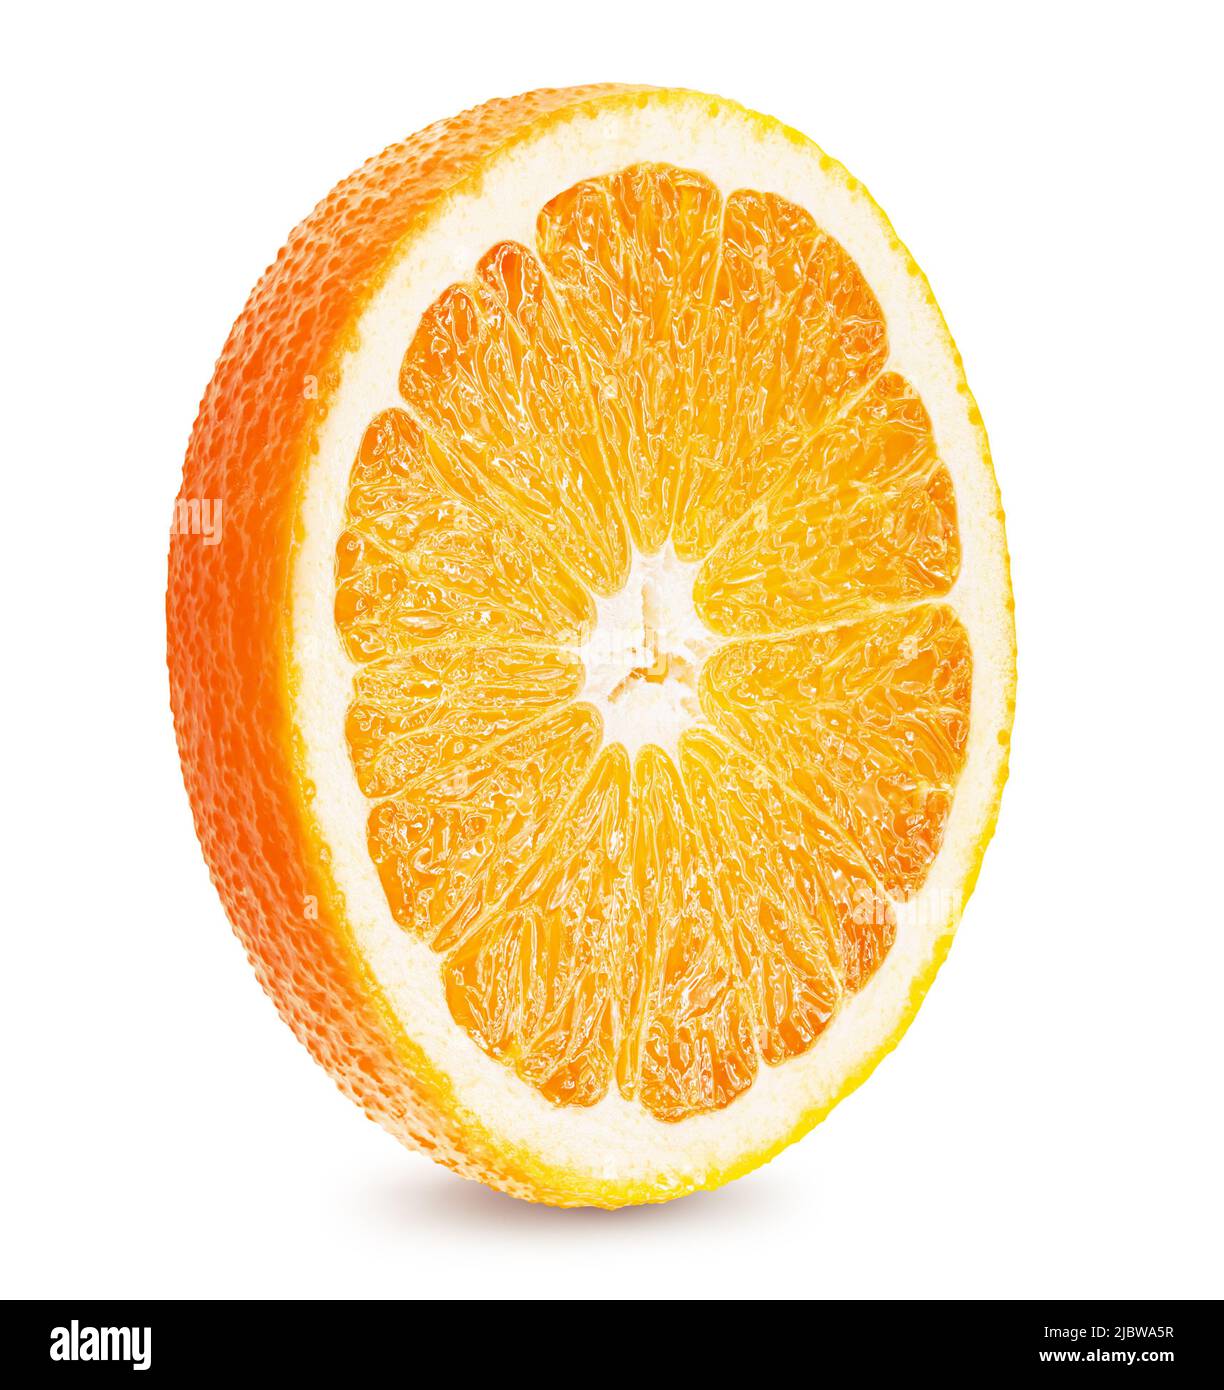 orange slice isolated on a white background with clipping path. Stock Photo